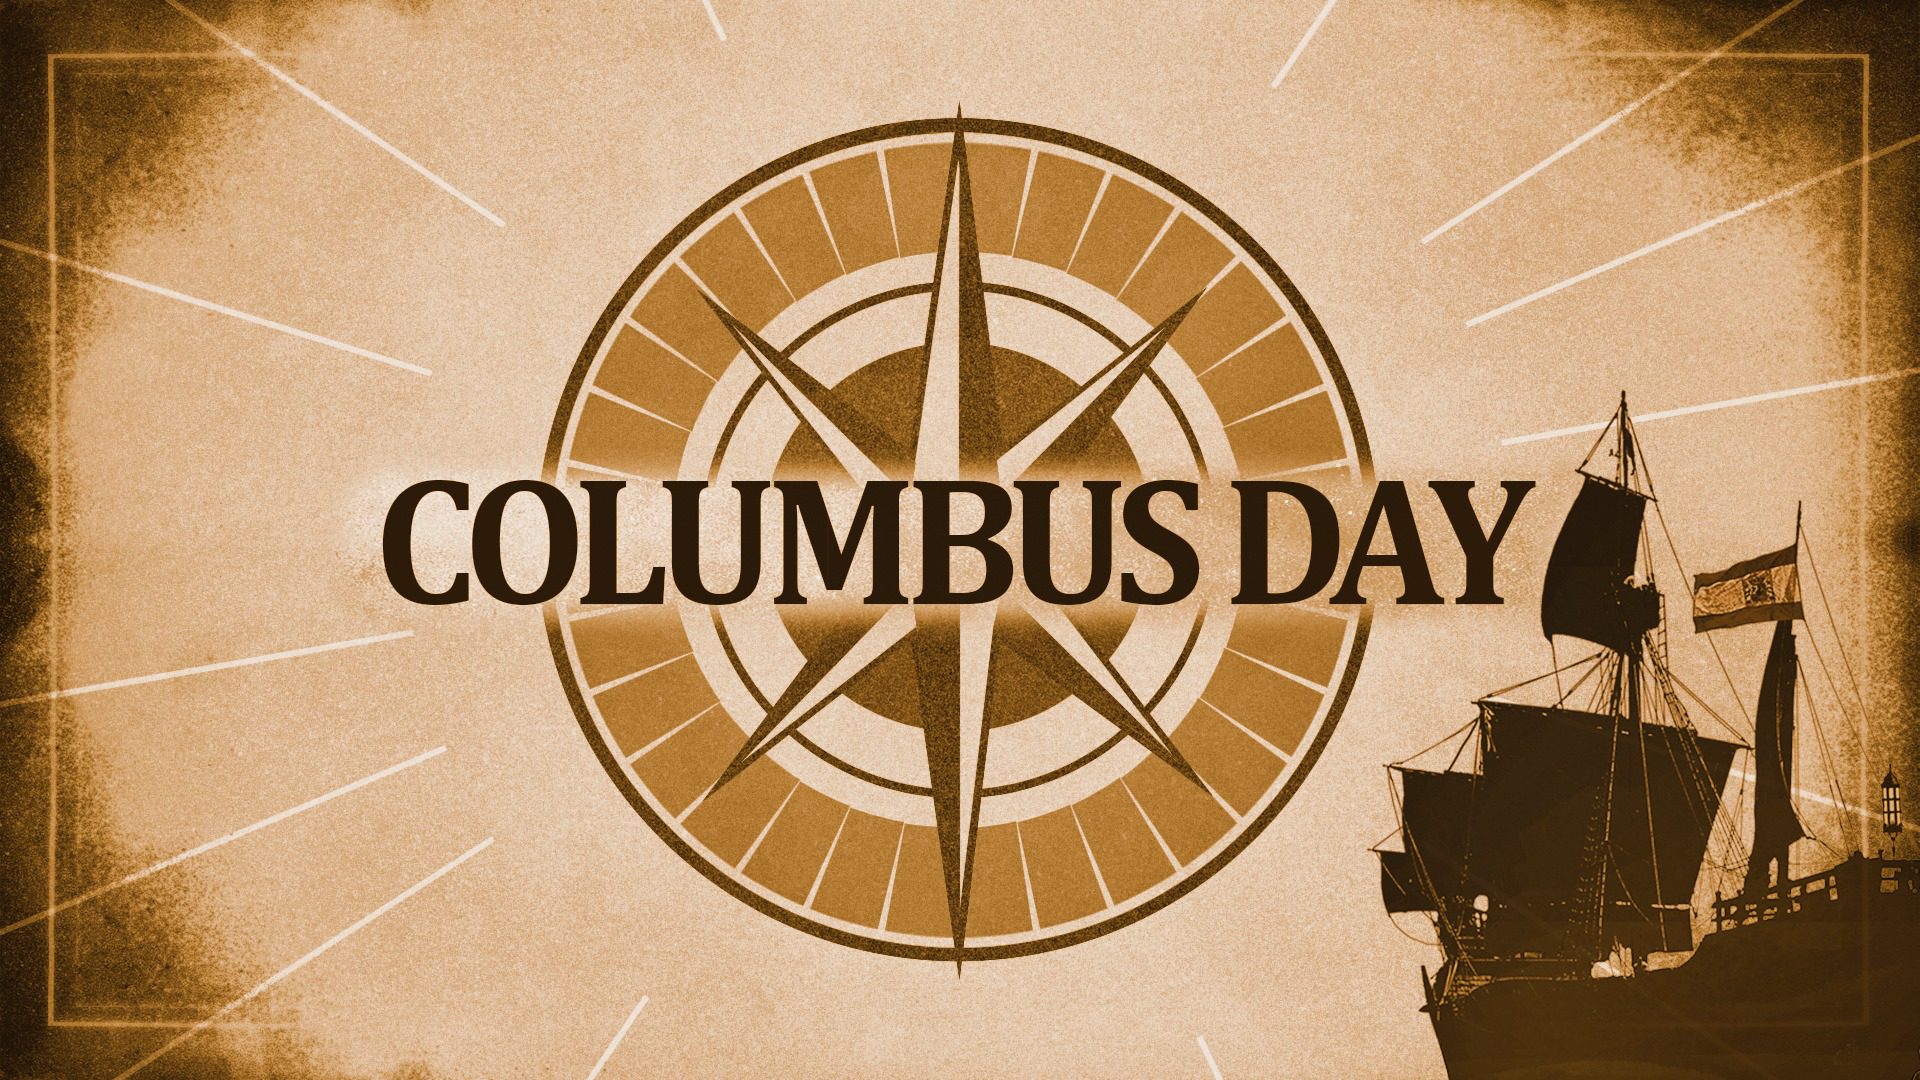 City Offices Closed Oct. 10 for Columbus Day The City of Slidell